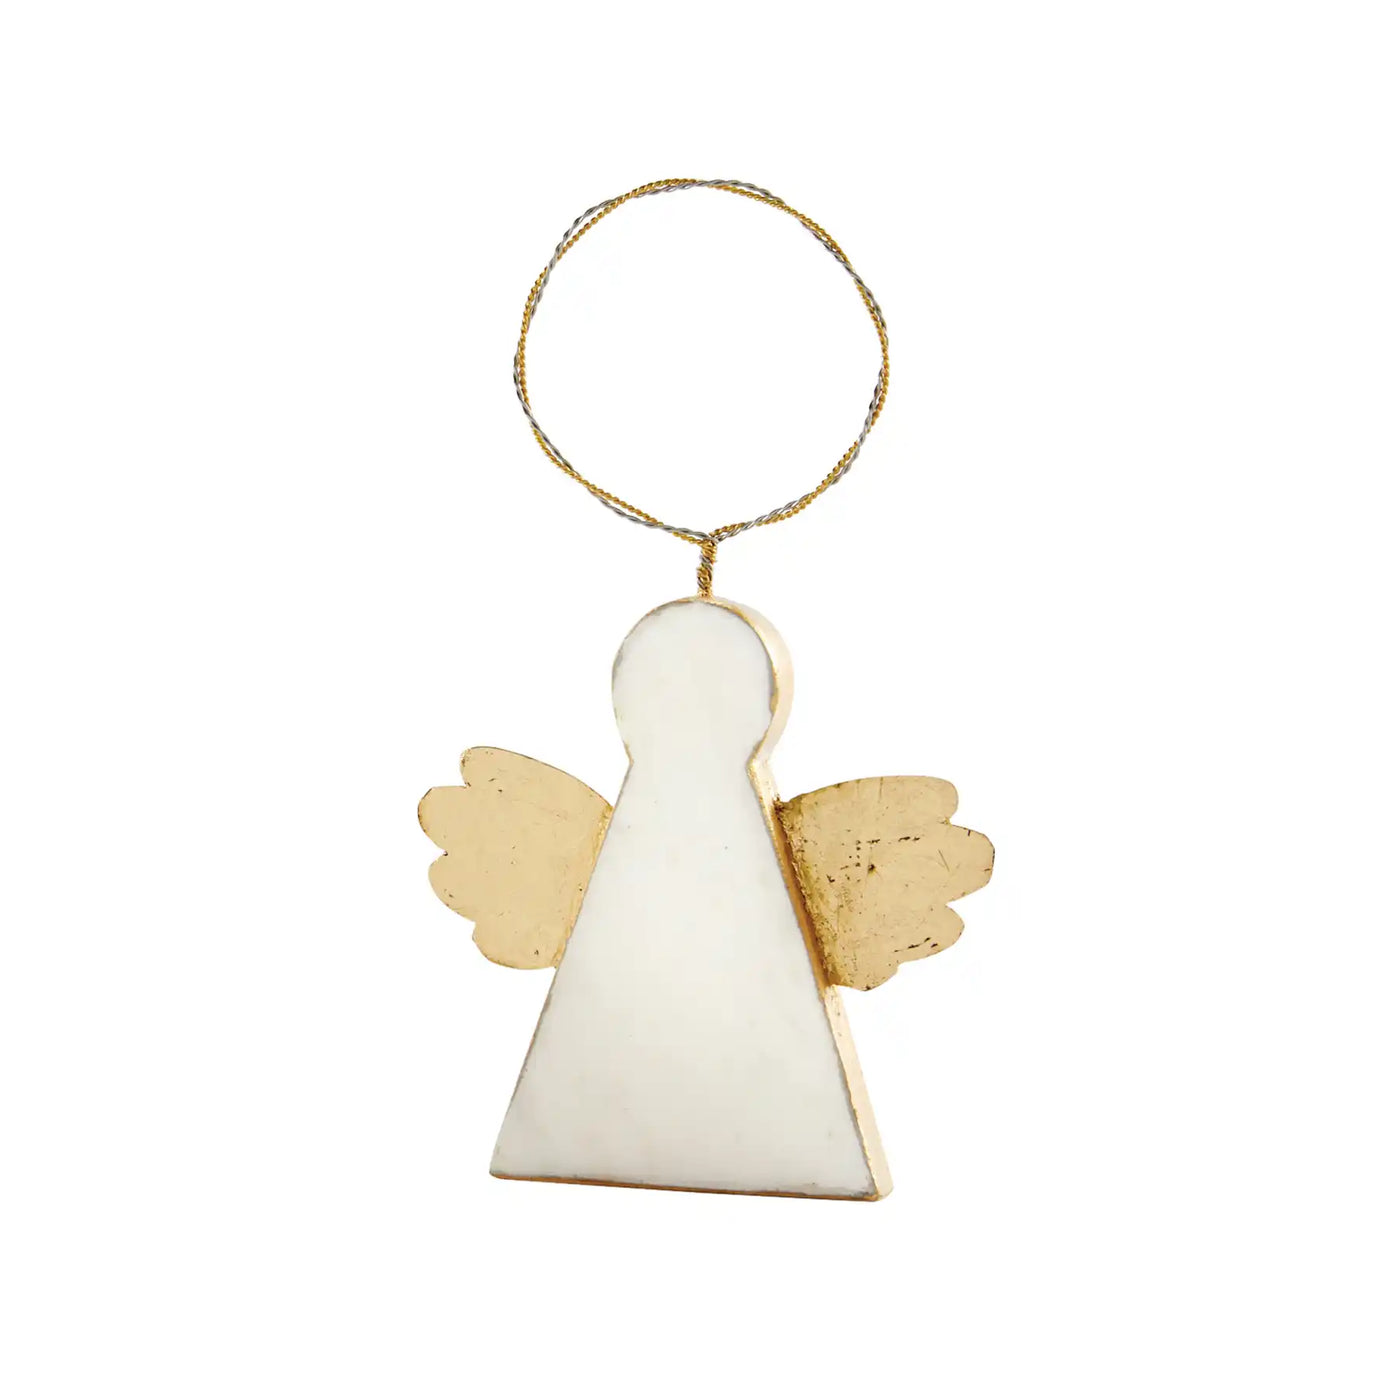 Marble Angel Christmas Ornament by Mud Pie